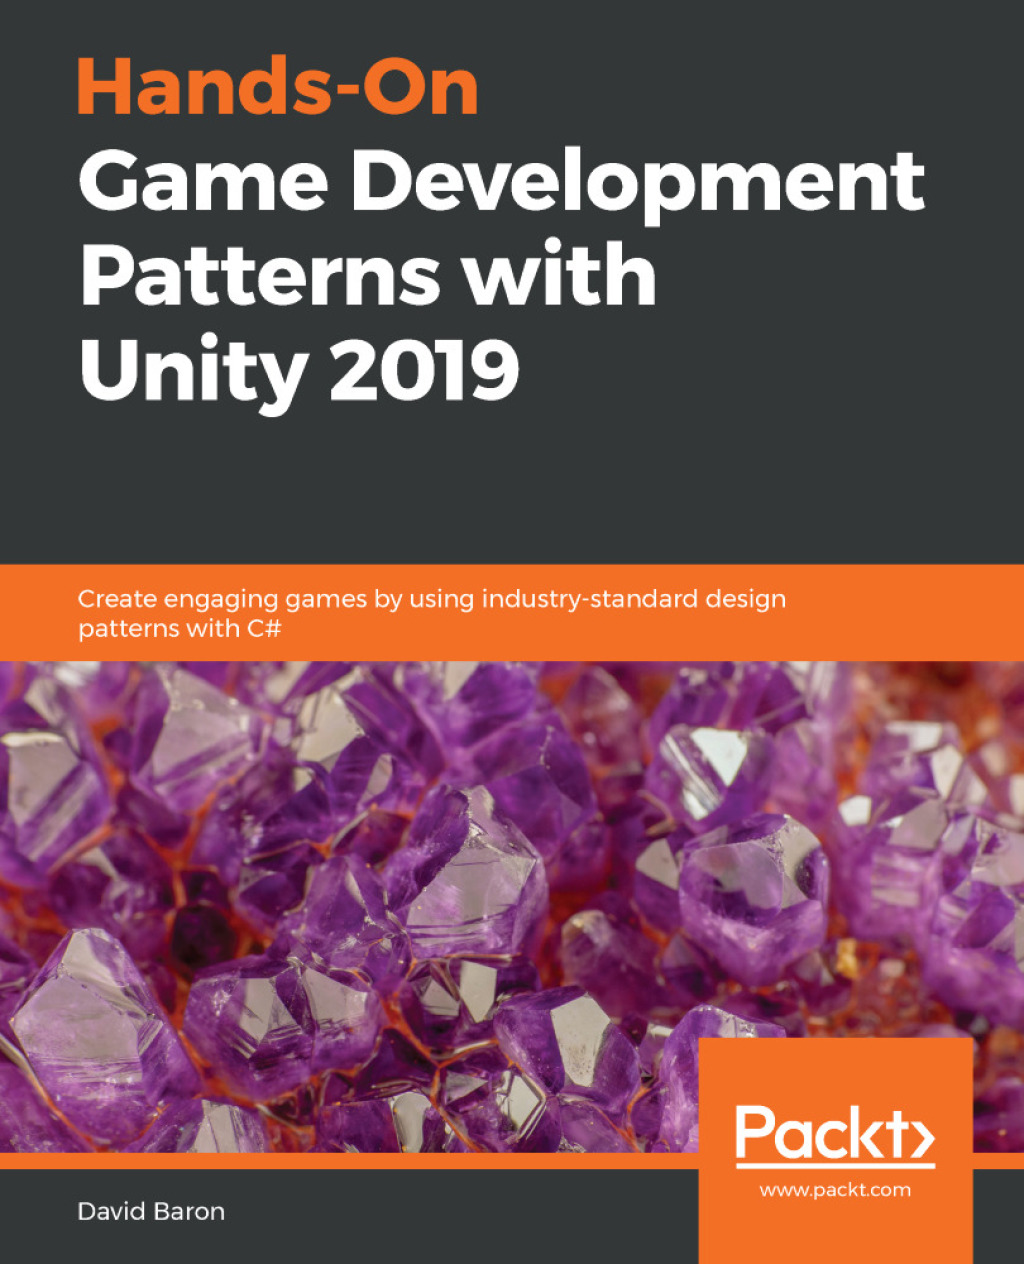 Hands-On Game Development Patterns with Unity 2019 (eBook) - David Baron